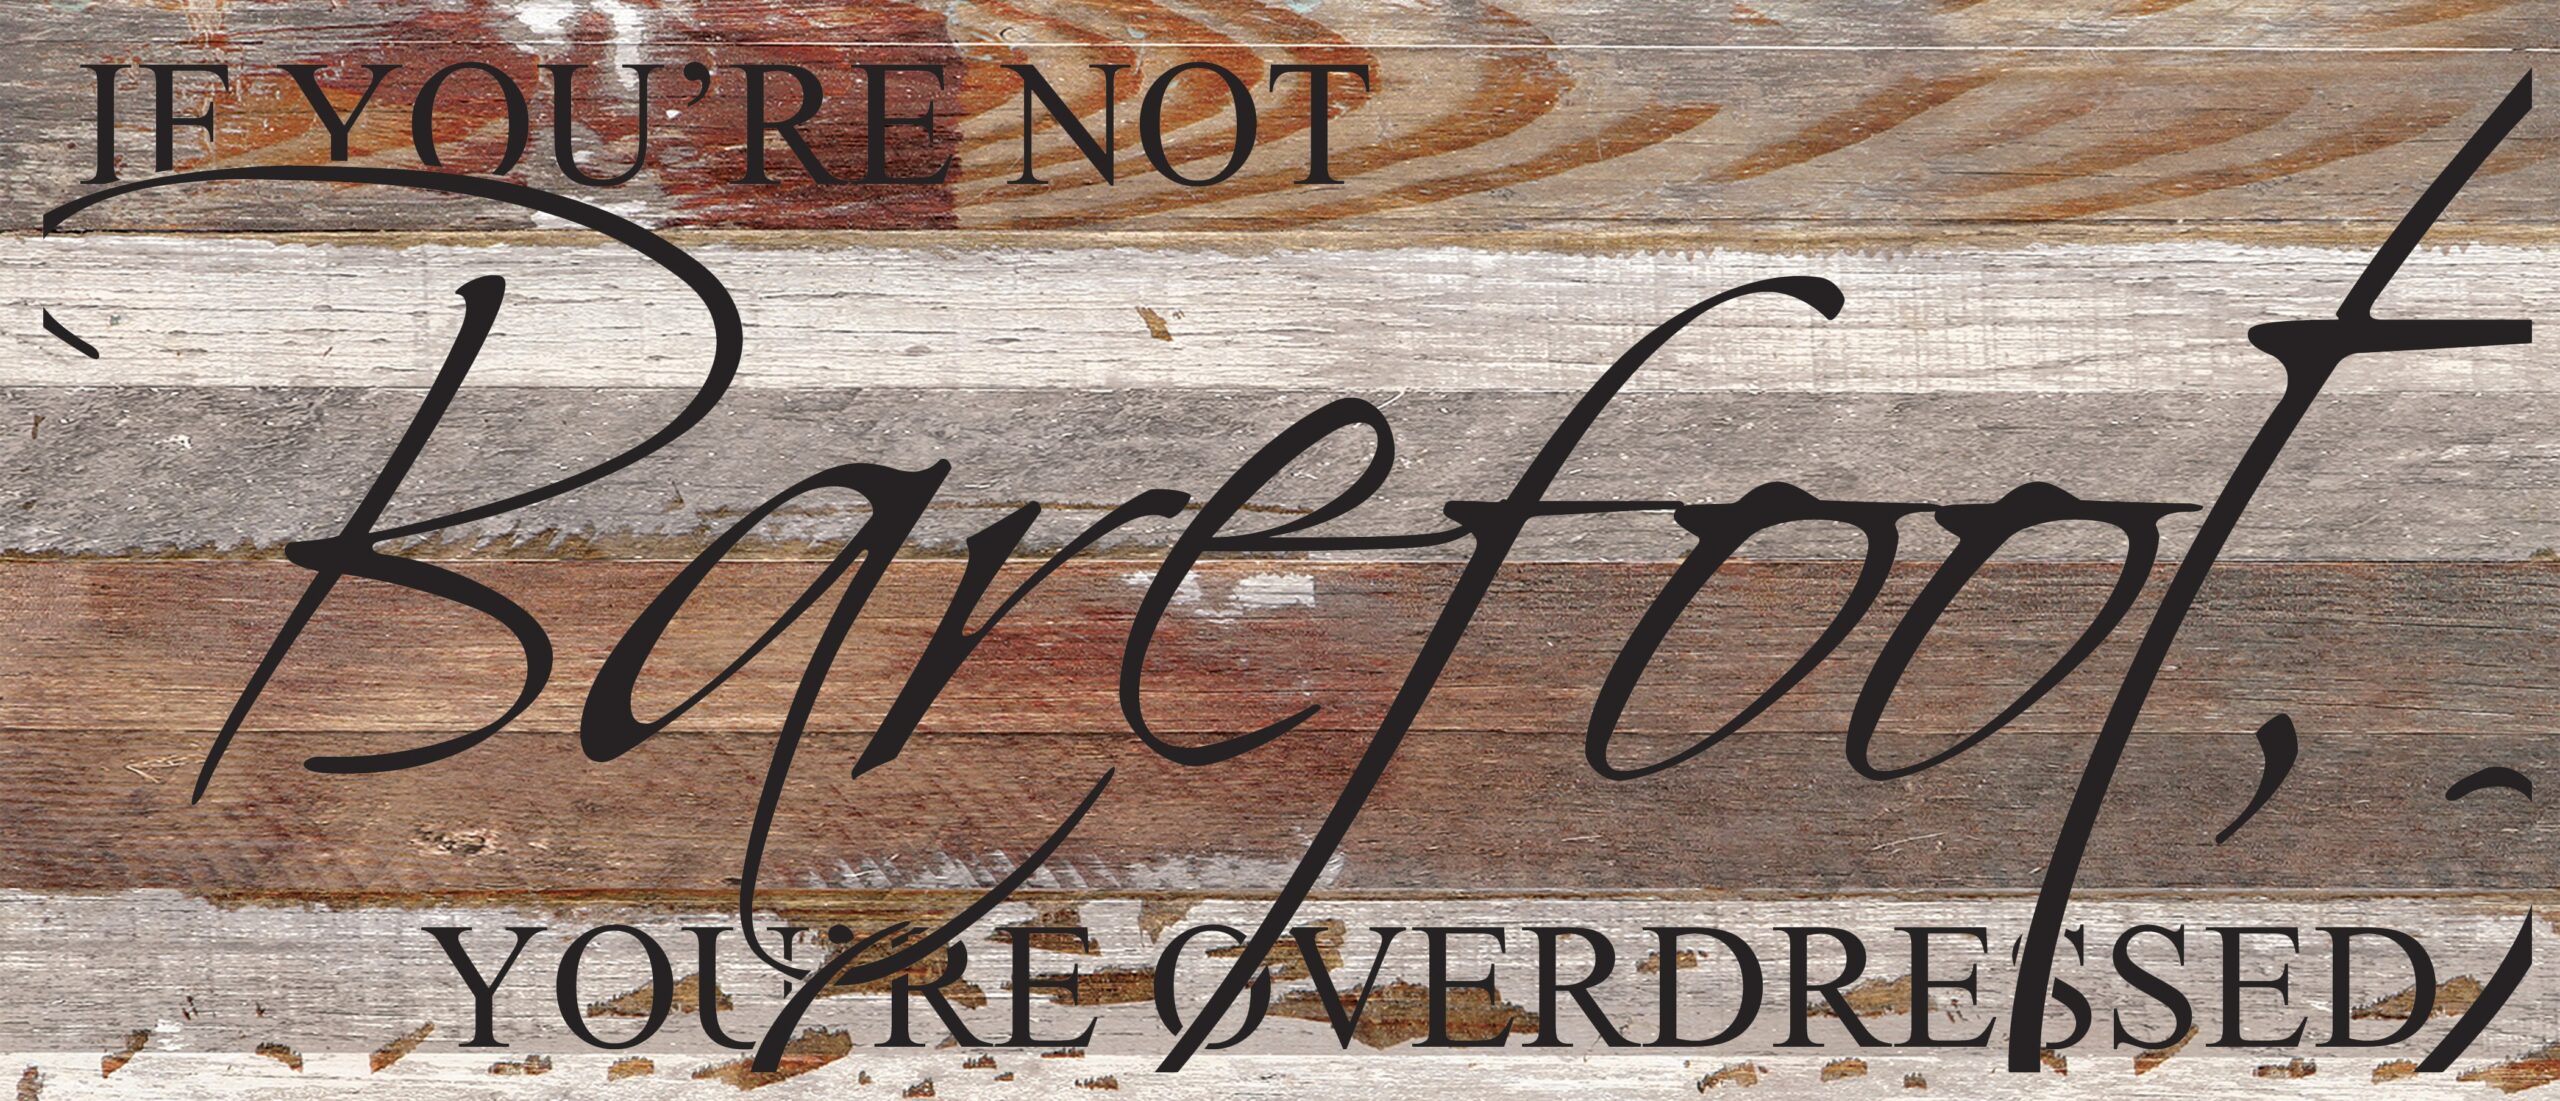 If you're not barefoot, you're overdressed. / 14"x6" Reclaimed Wood Sign